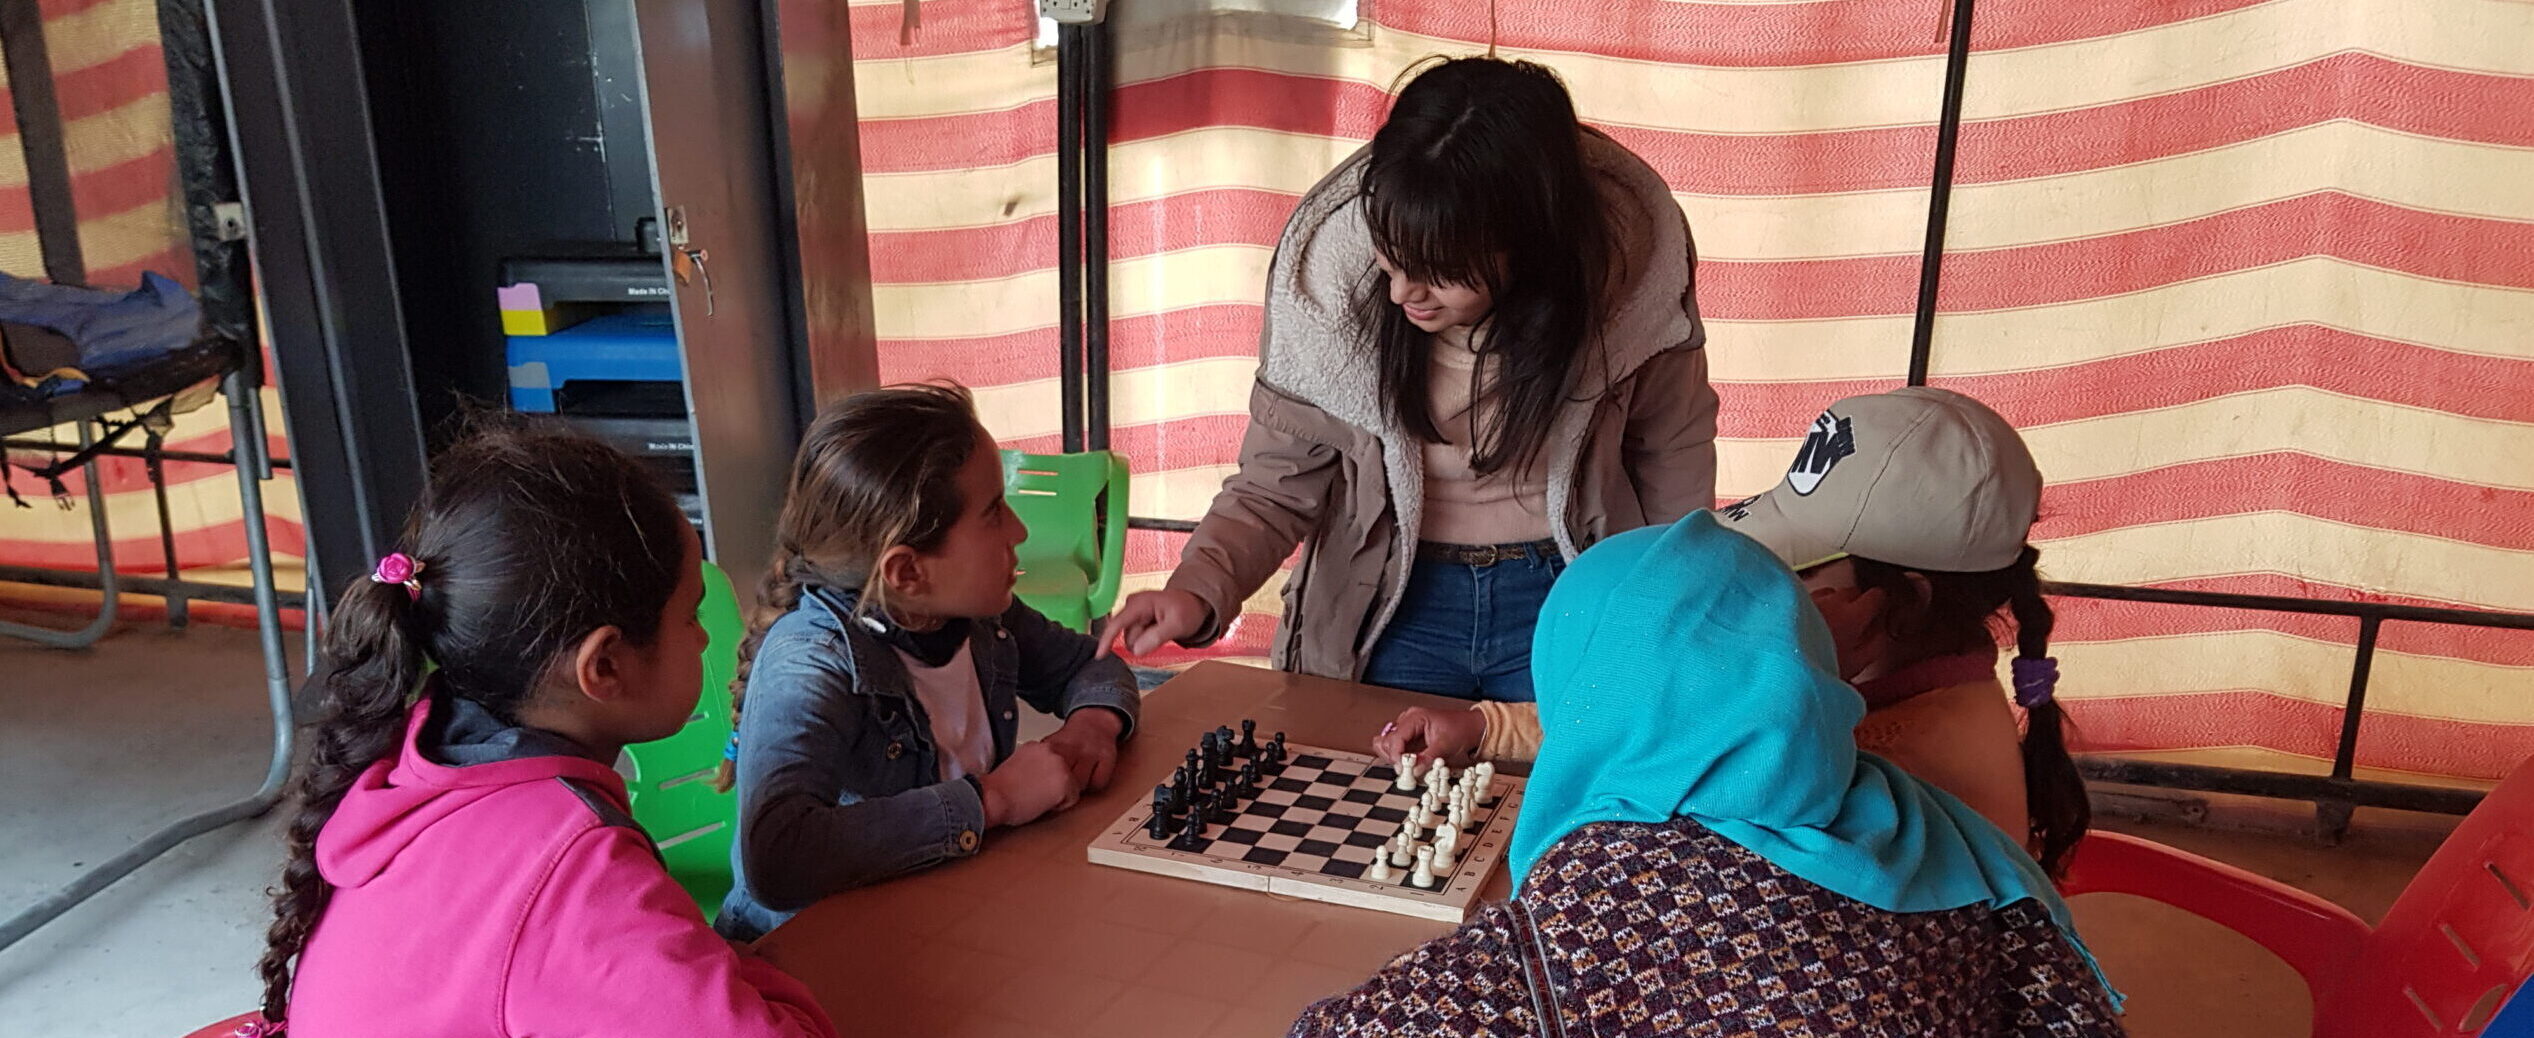 Checkmate: Building Skills Through Chess